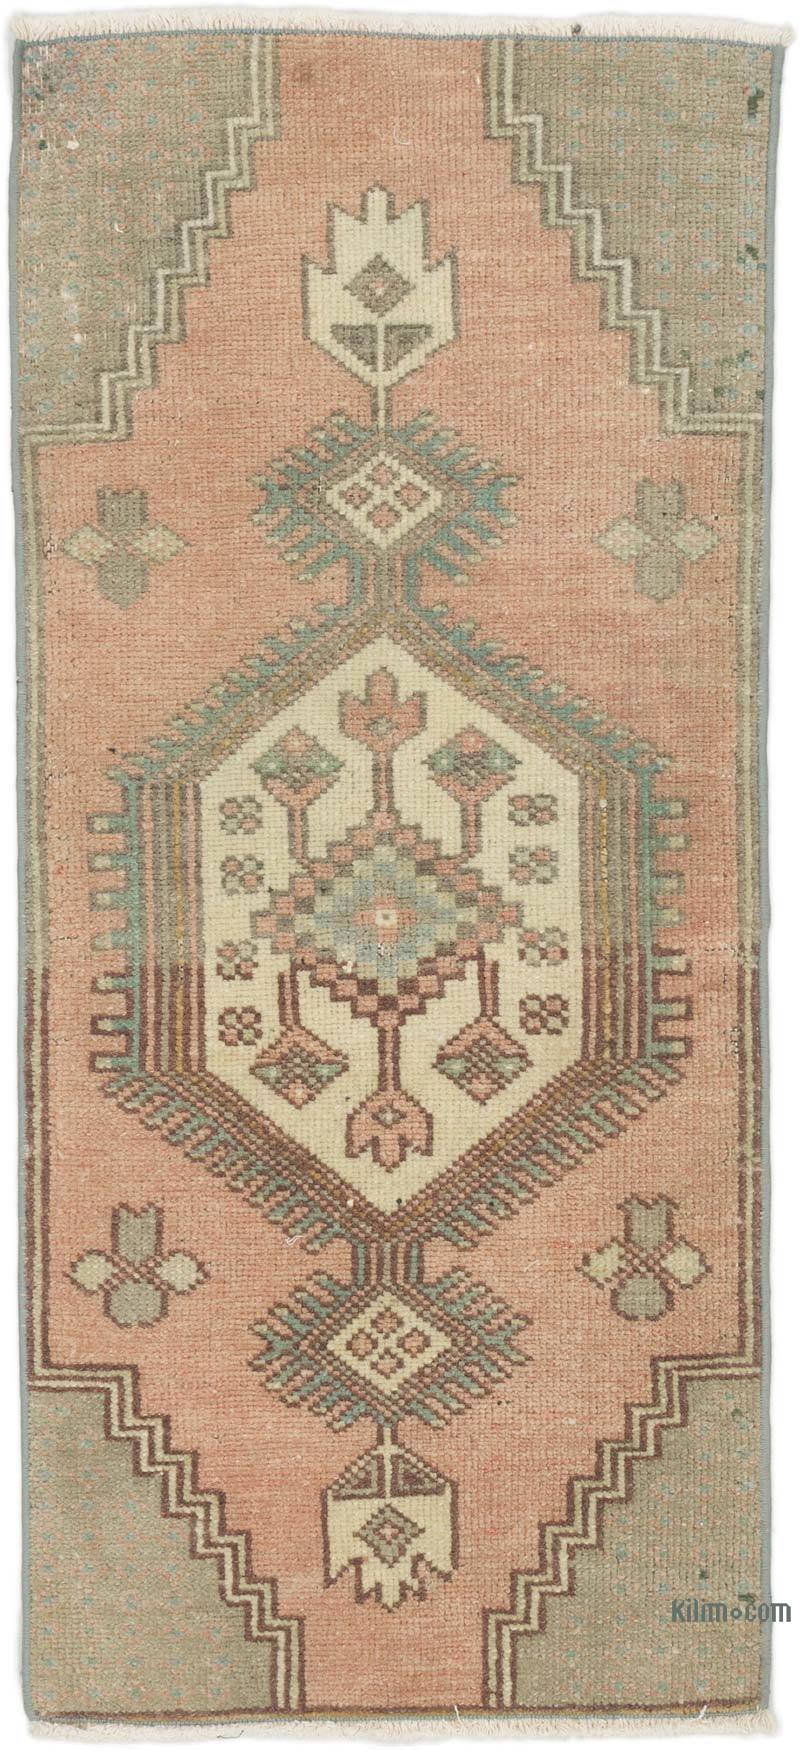 Vintage Turkish Hand-Knotted Rug - 1' 6" x 3' 2" (18 in. x 38 in.) - K0062823